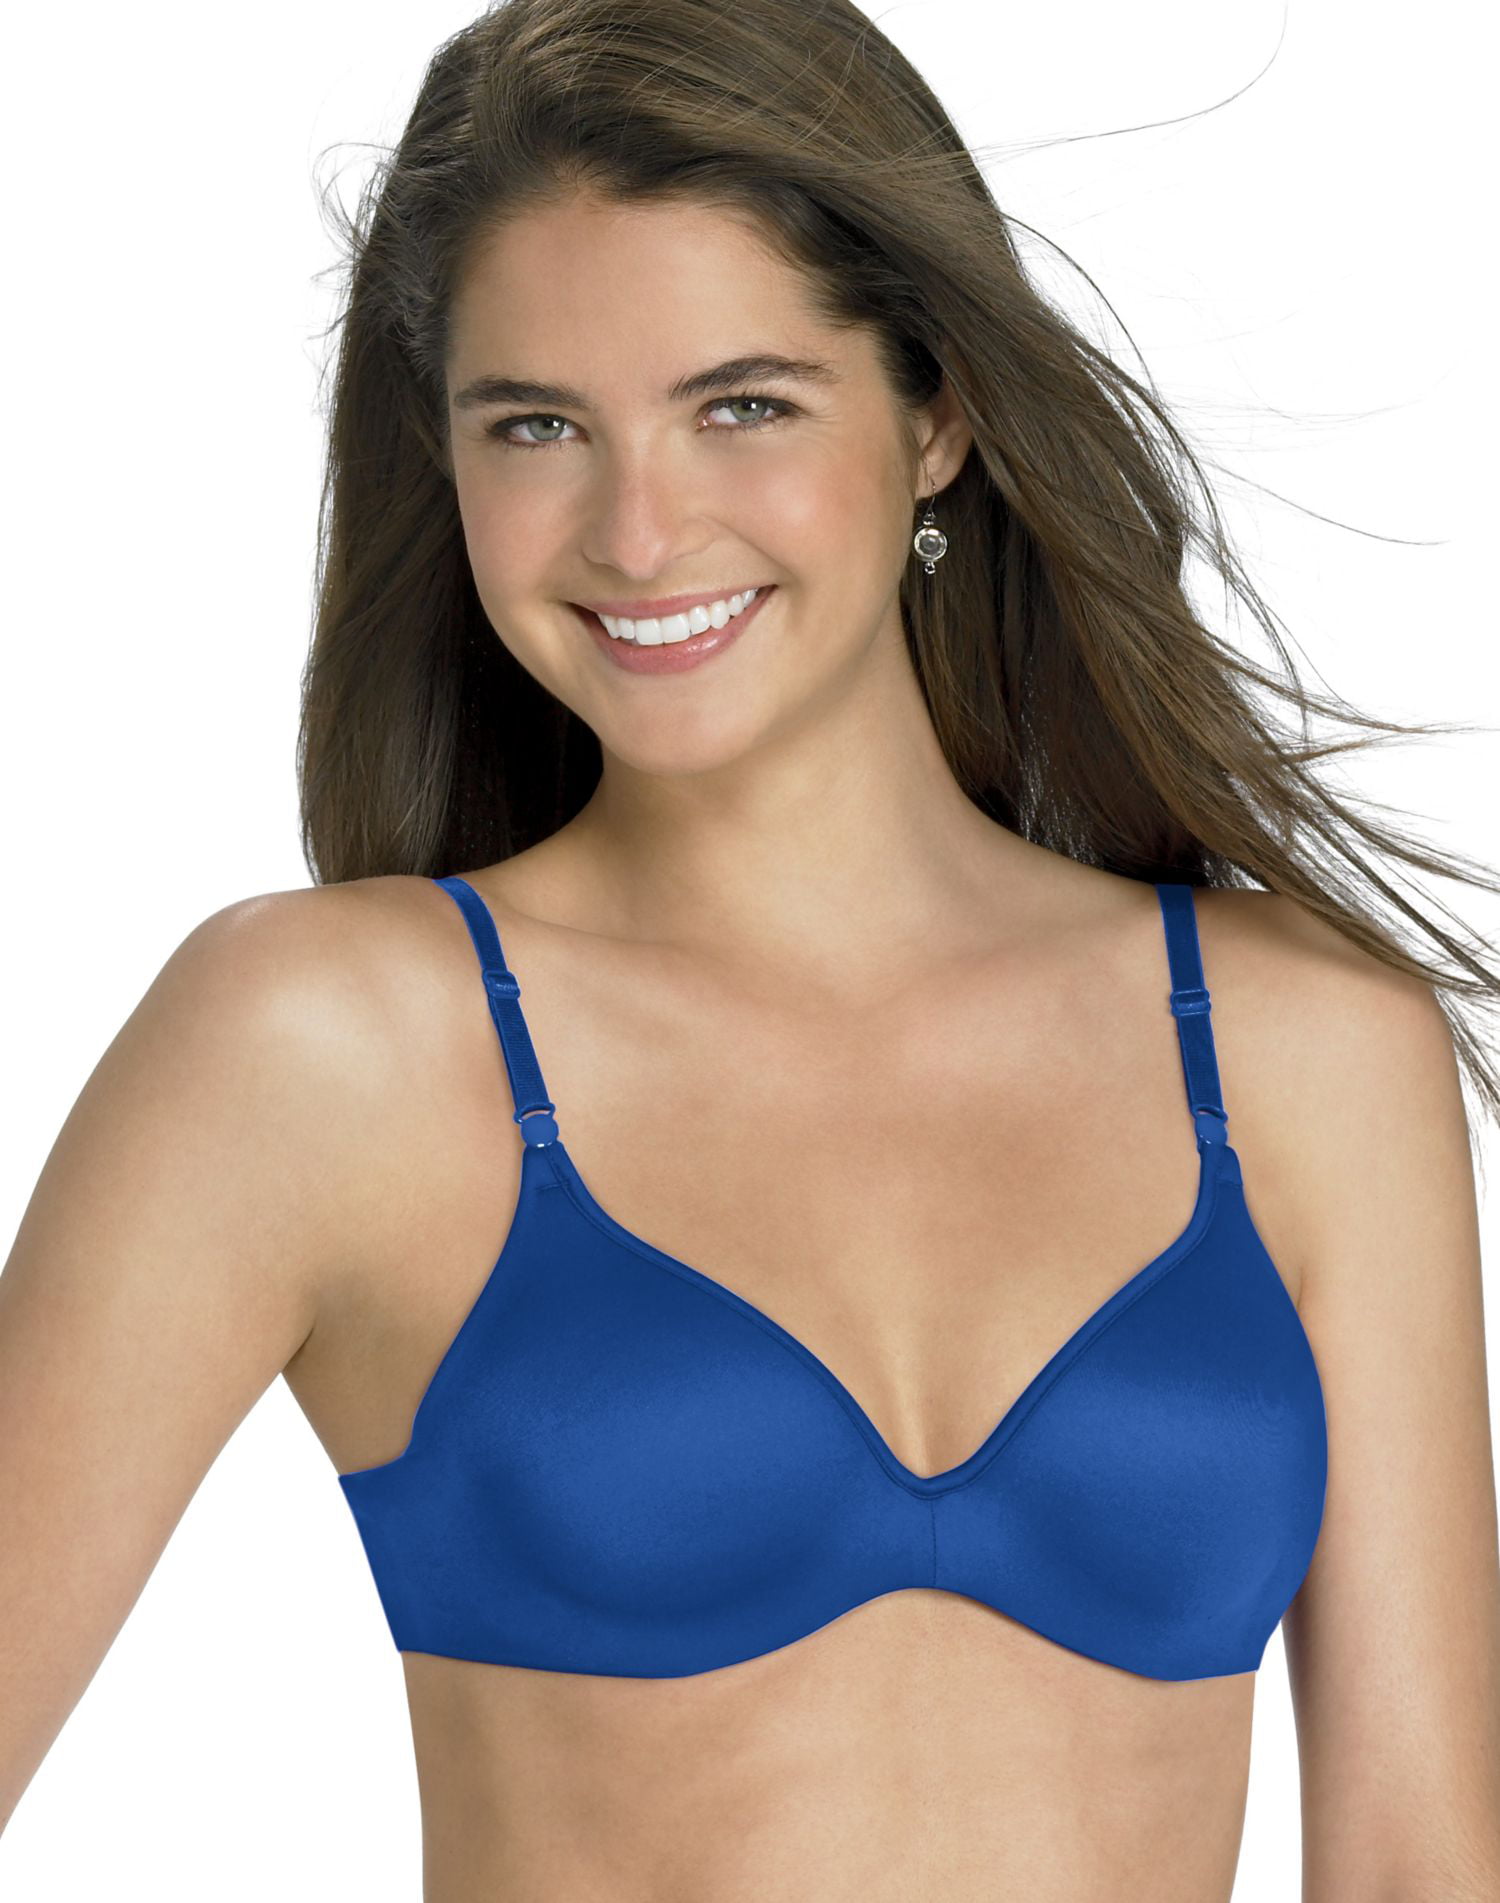 Barely There Invisible Look Women`s Underwire Bra - Best-Seller, 36B 